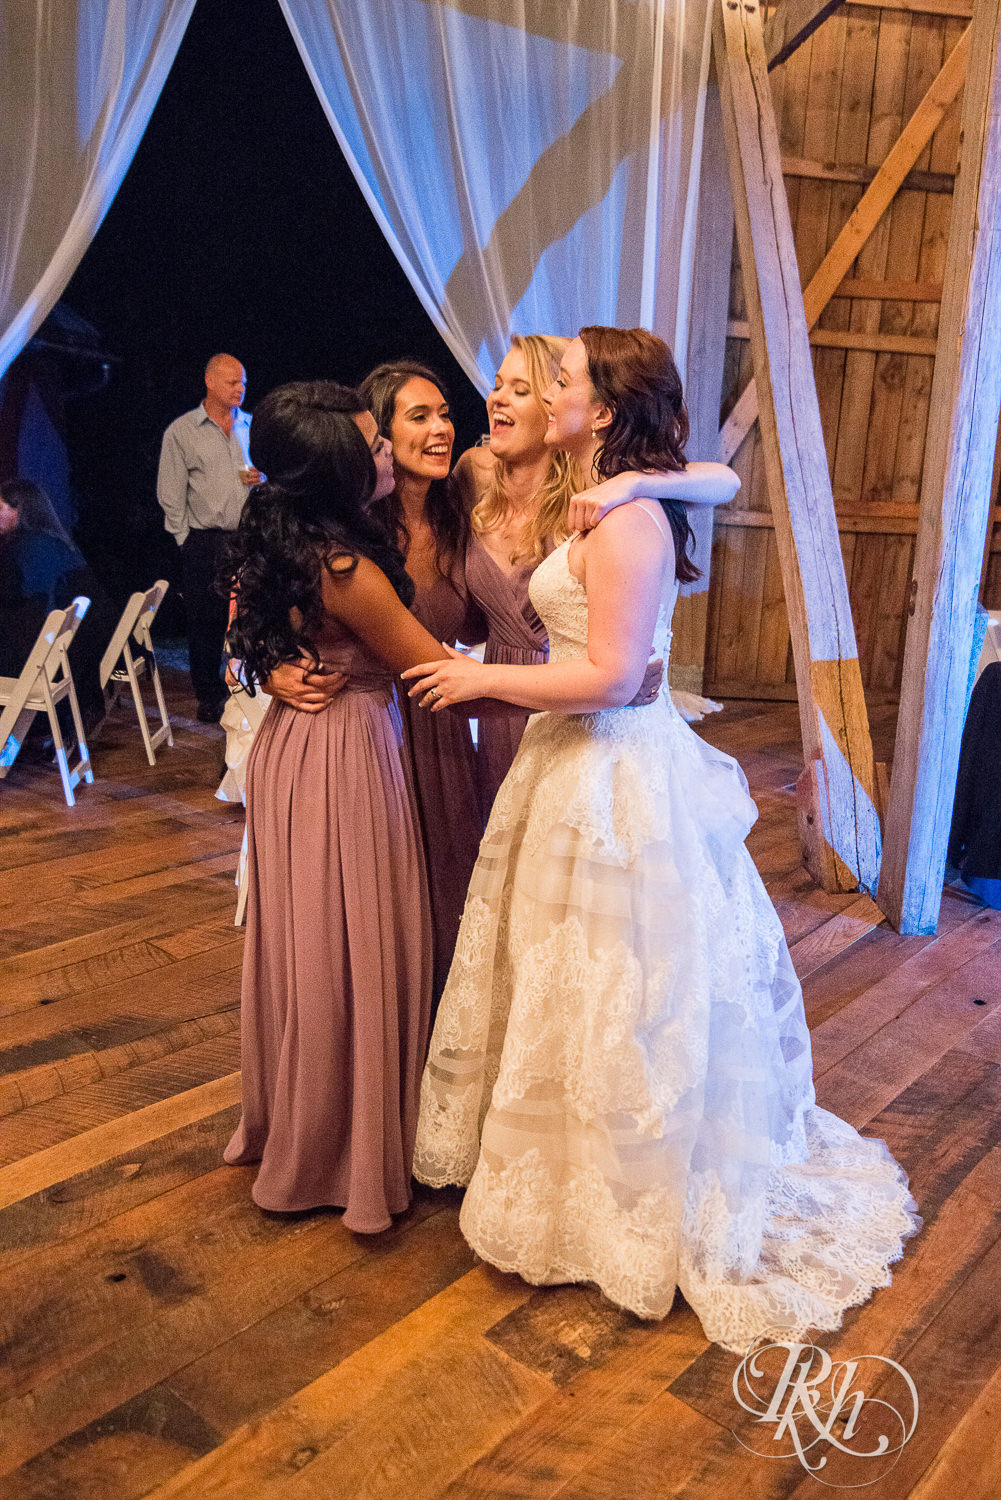 Bride and guests dance during wedding reception at Birch Hill Barn in Glenwood City, Wisconsin.